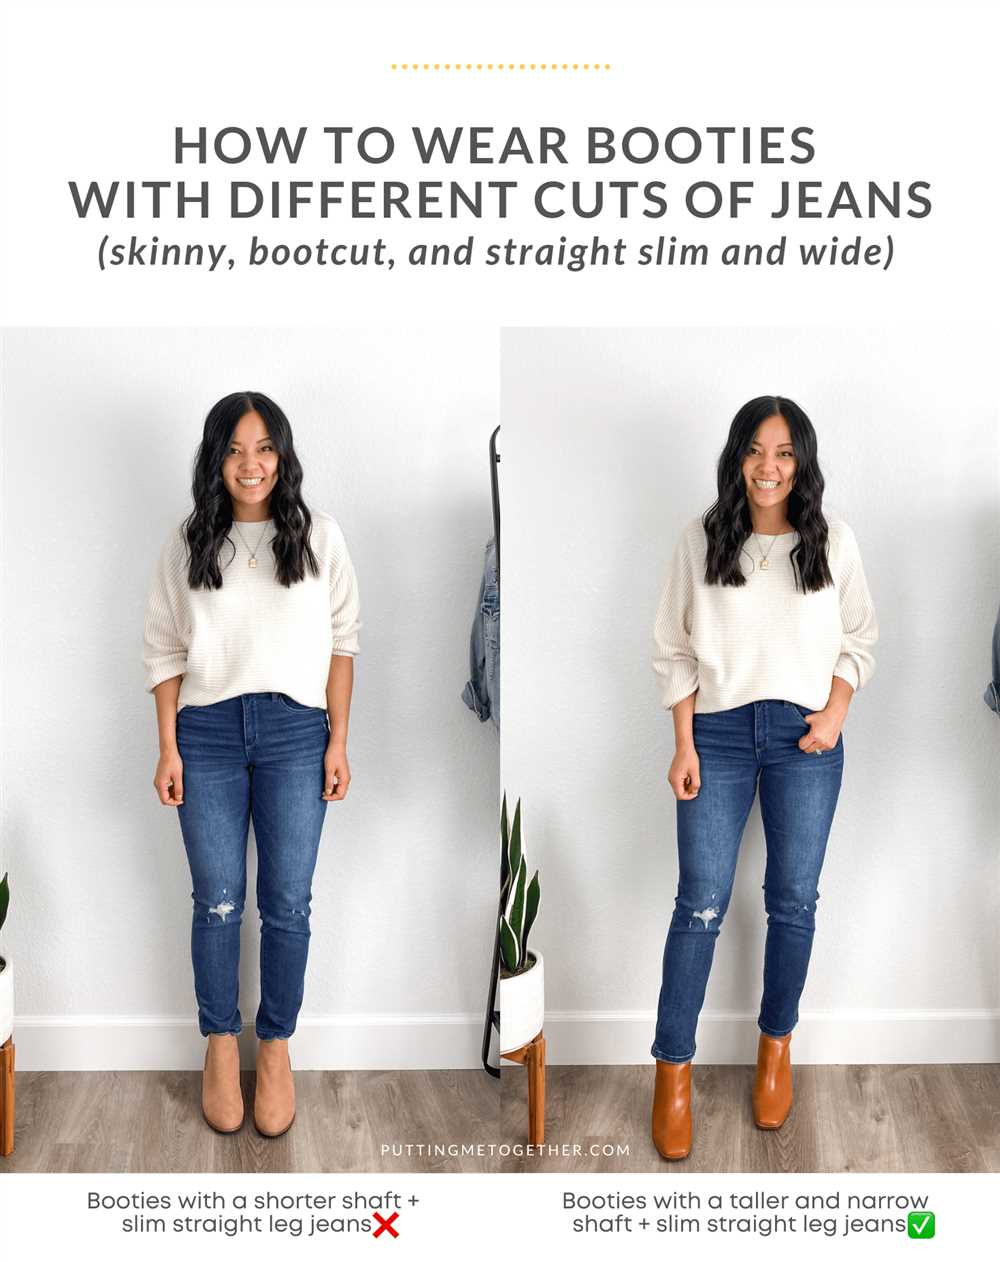 How to wear chelsea boots with jeans